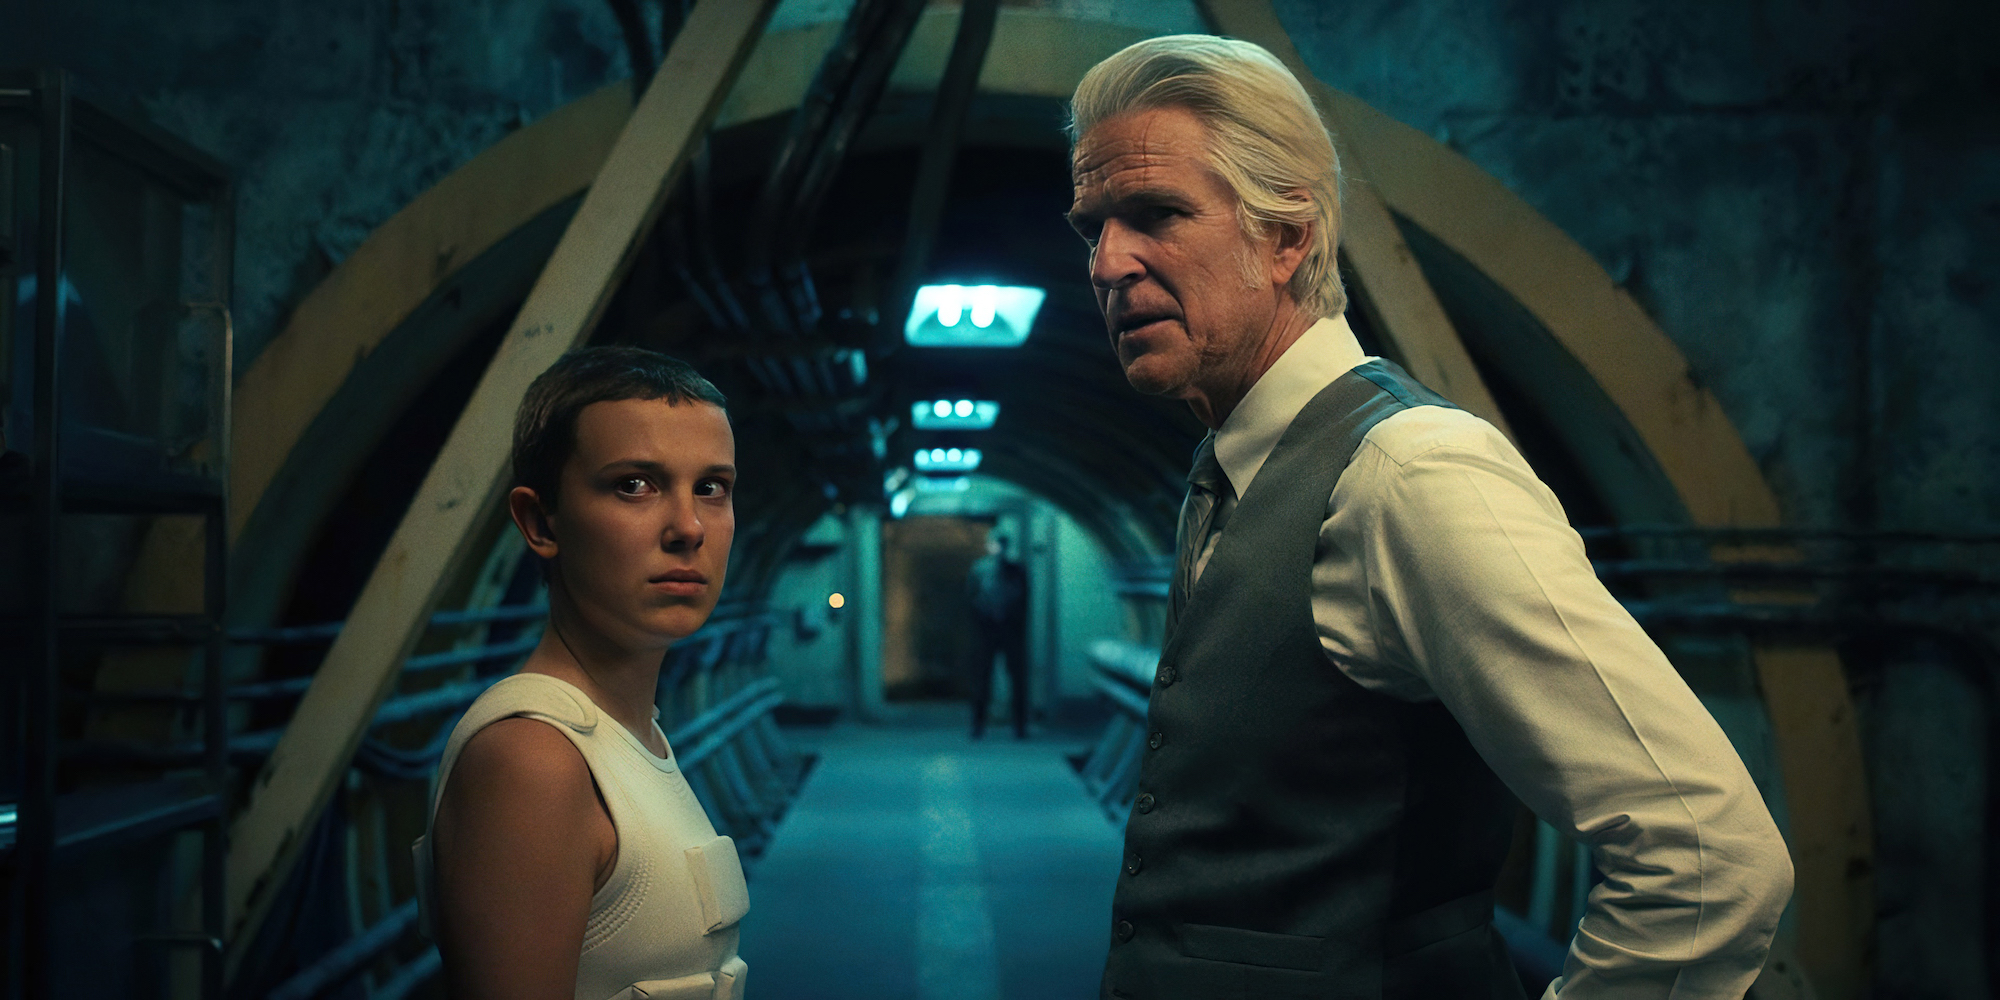 The 'Stranger Things 4' Part 2 trailer reveals that Dr. Brenner doesn't believe Eleven is ready yet. Both Matthew Modine and Millie Bobby Brown are seen here in a production still.